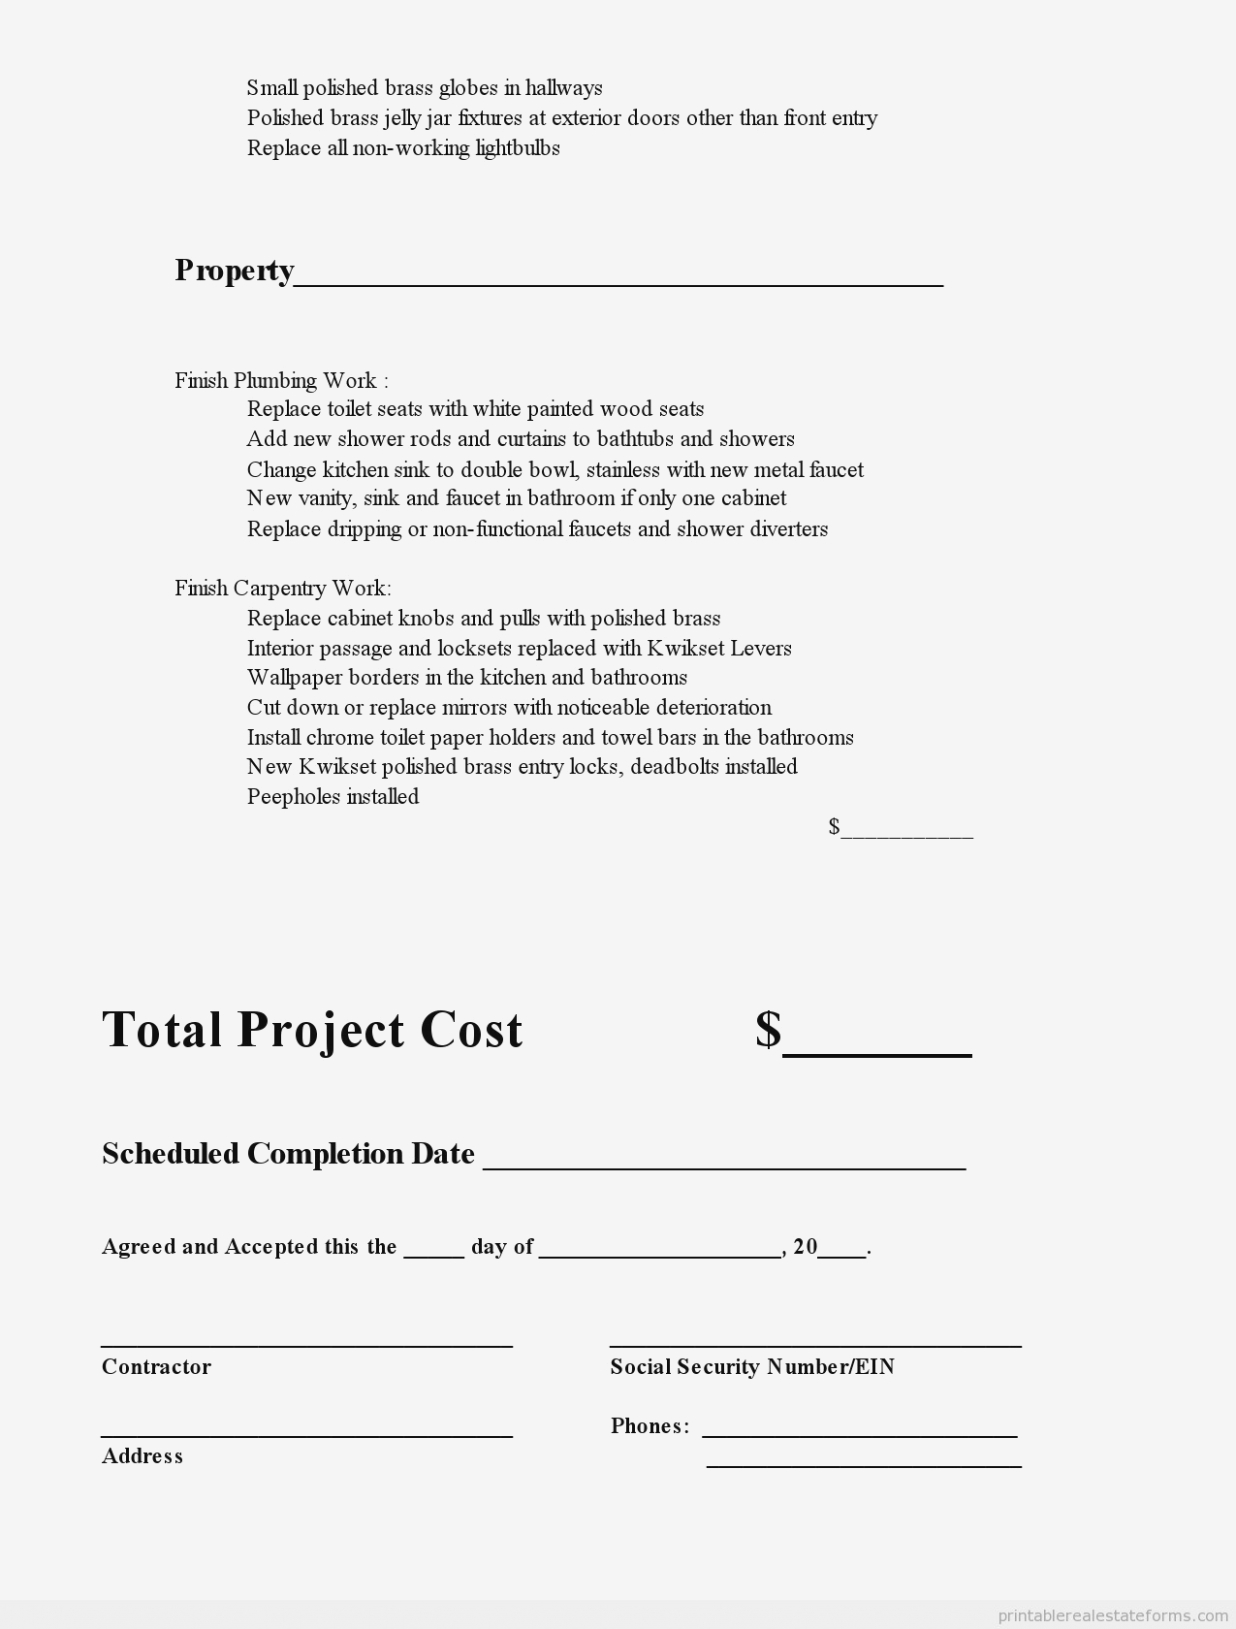 Free Printable Subcontractor Agreement Inspirational Sample - Free Printable Subcontractor Agreement